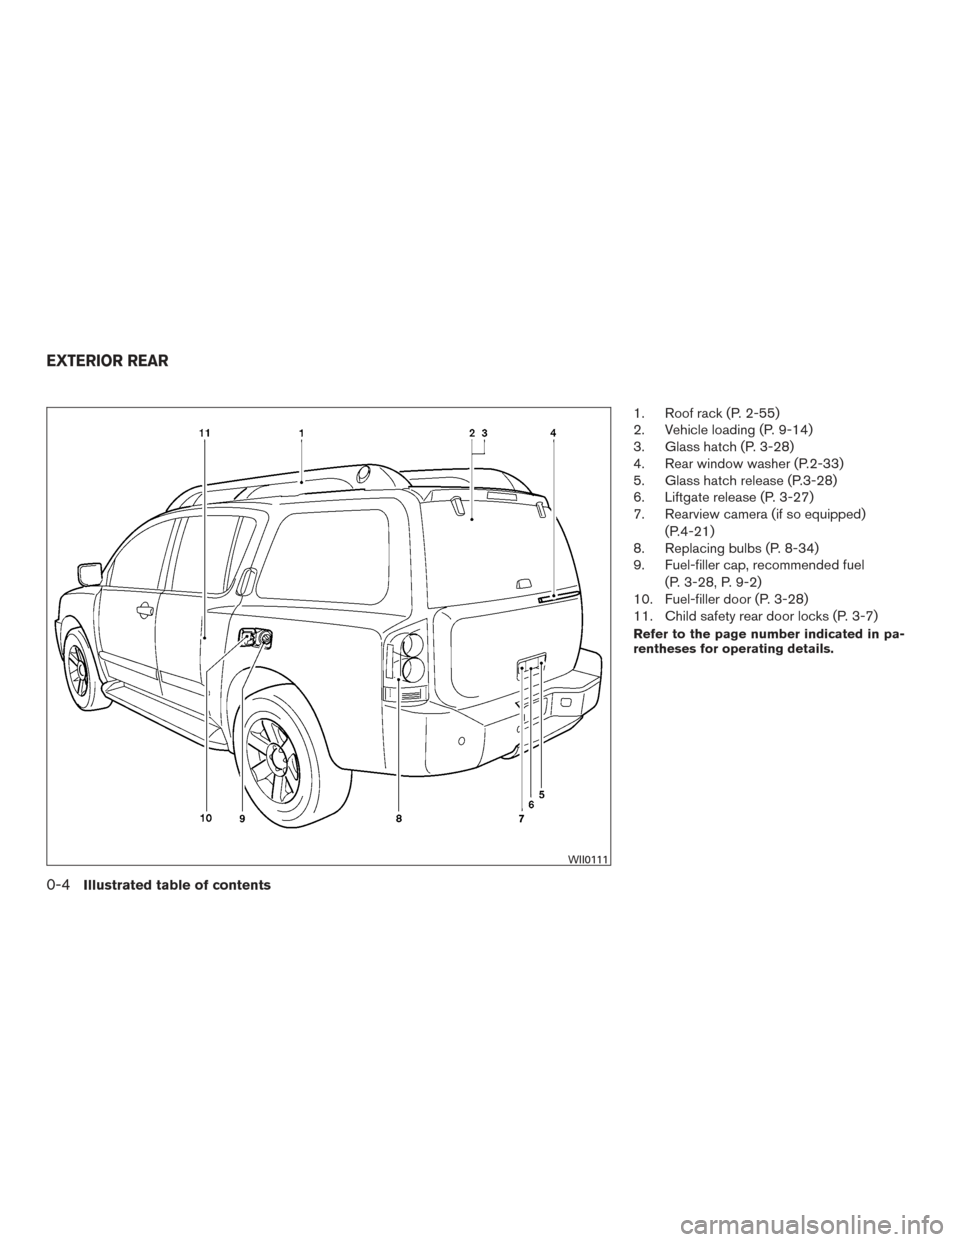 NISSAN ARMADA 2015 1.G Owners Manual 1. Roof rack (P. 2-55)
2. Vehicle loading (P. 9-14)
3. Glass hatch (P. 3-28)
4. Rear window washer (P.2-33)
5. Glass hatch release (P.3-28)
6. Liftgate release (P. 3-27)
7. Rearview camera (if so equi